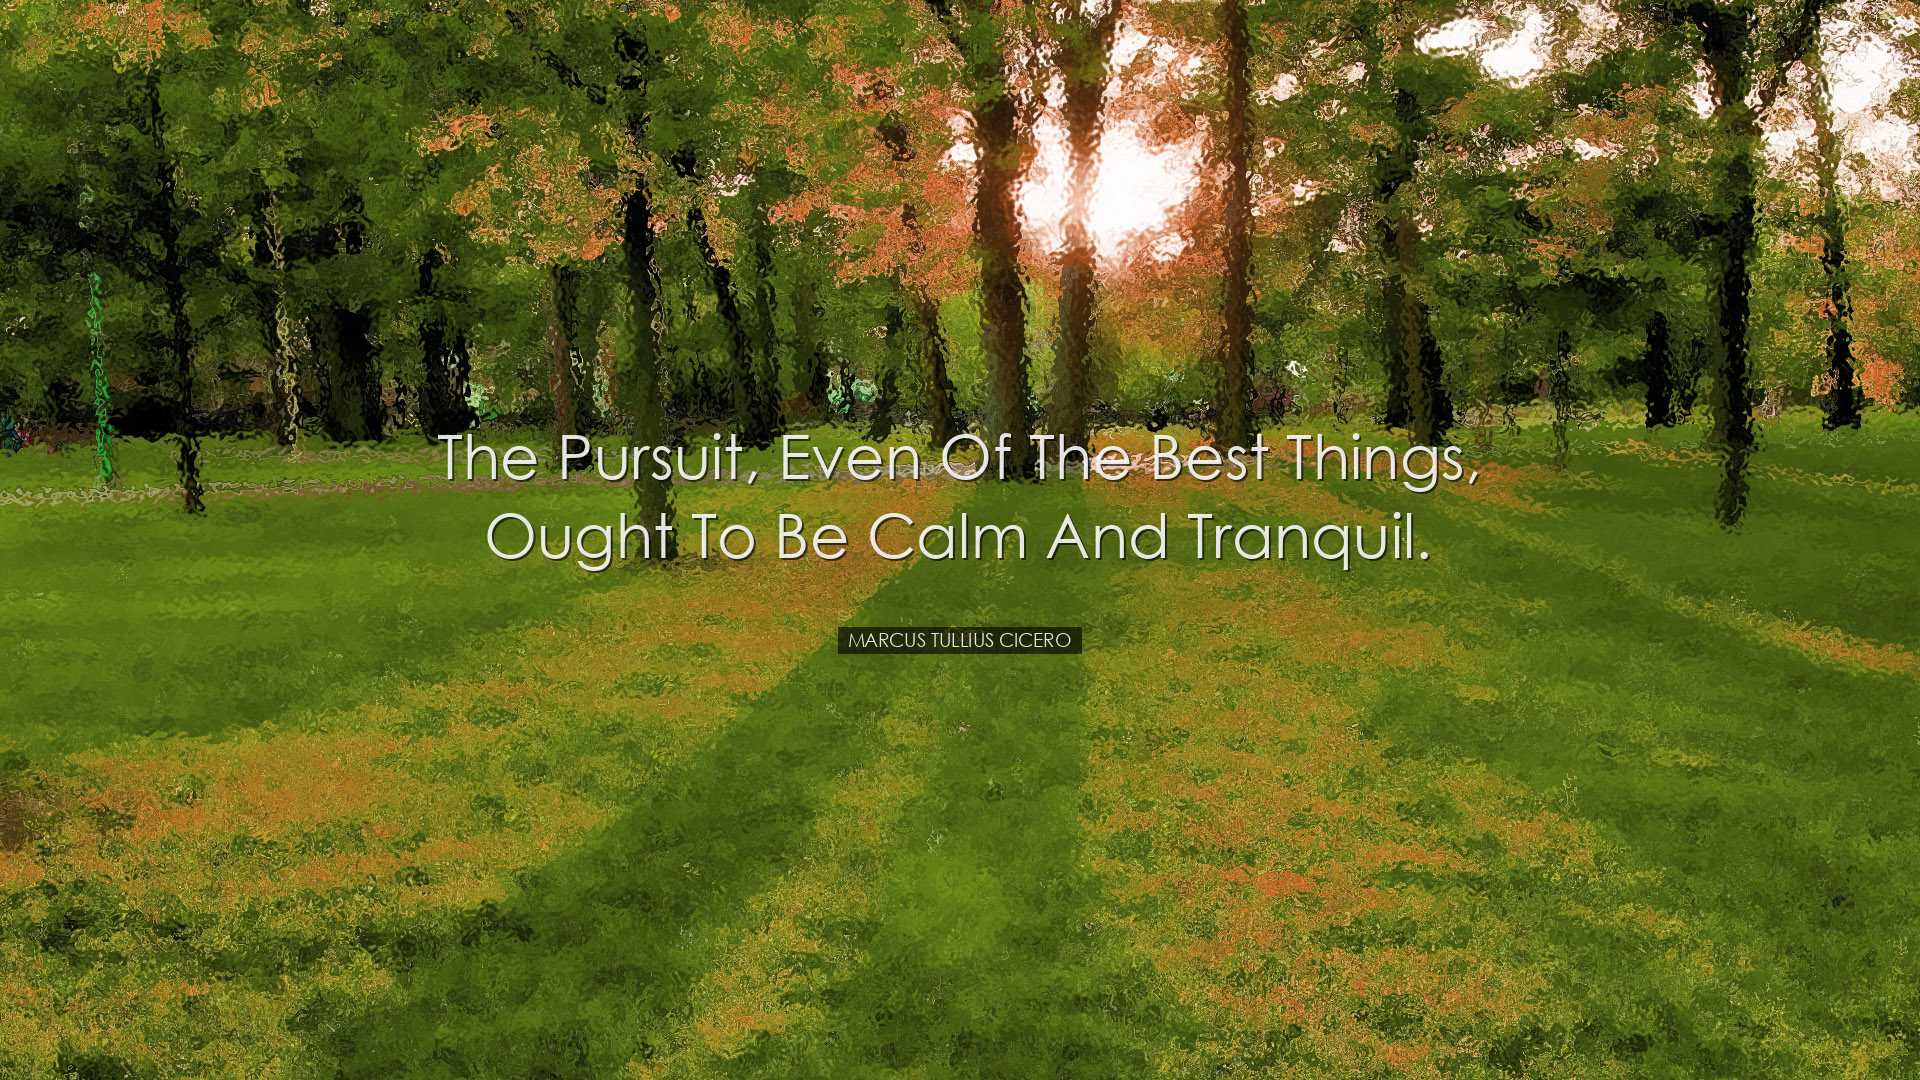 The pursuit, even of the best things, ought to be calm and tranqui